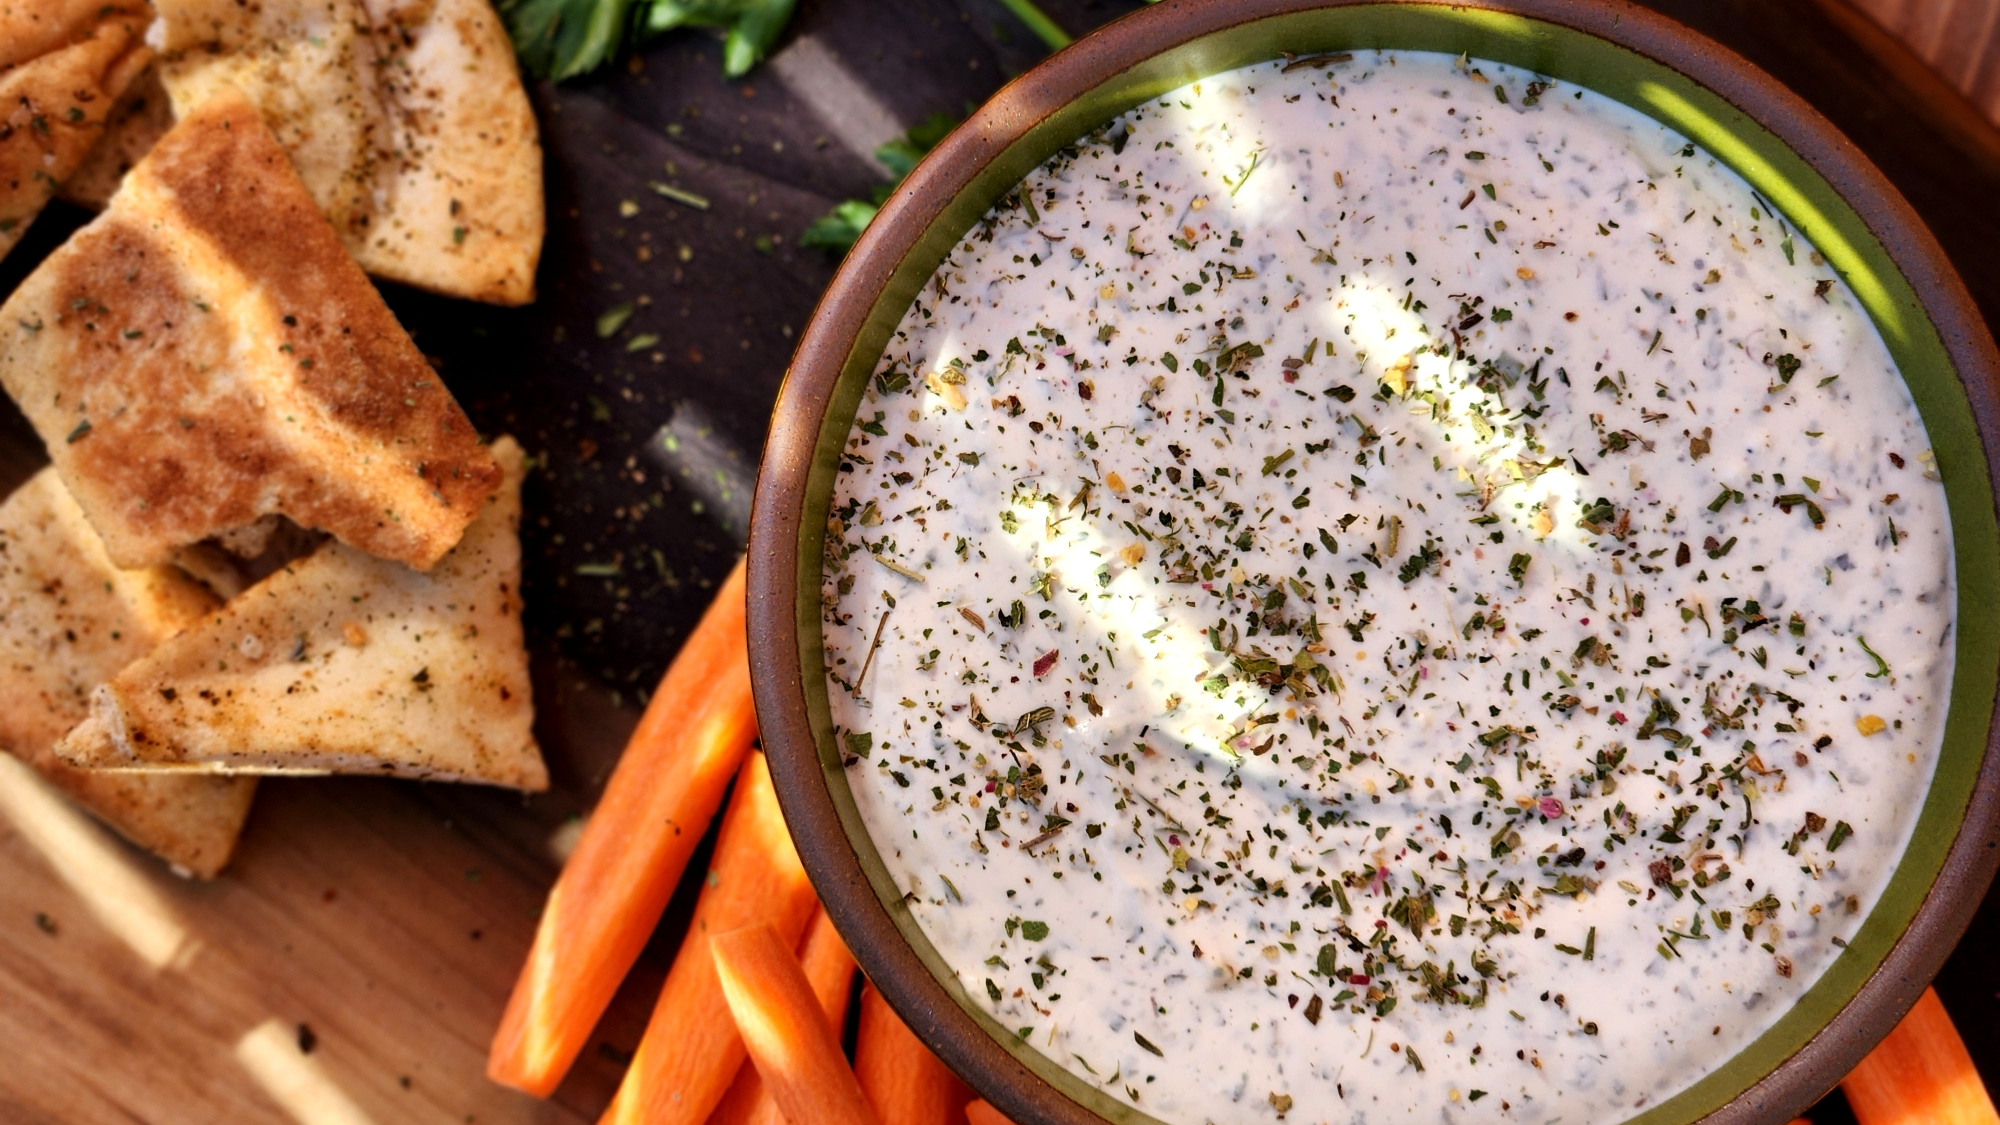 Image of Wild Green Goddess Dip with carrot sticks and pita chips.